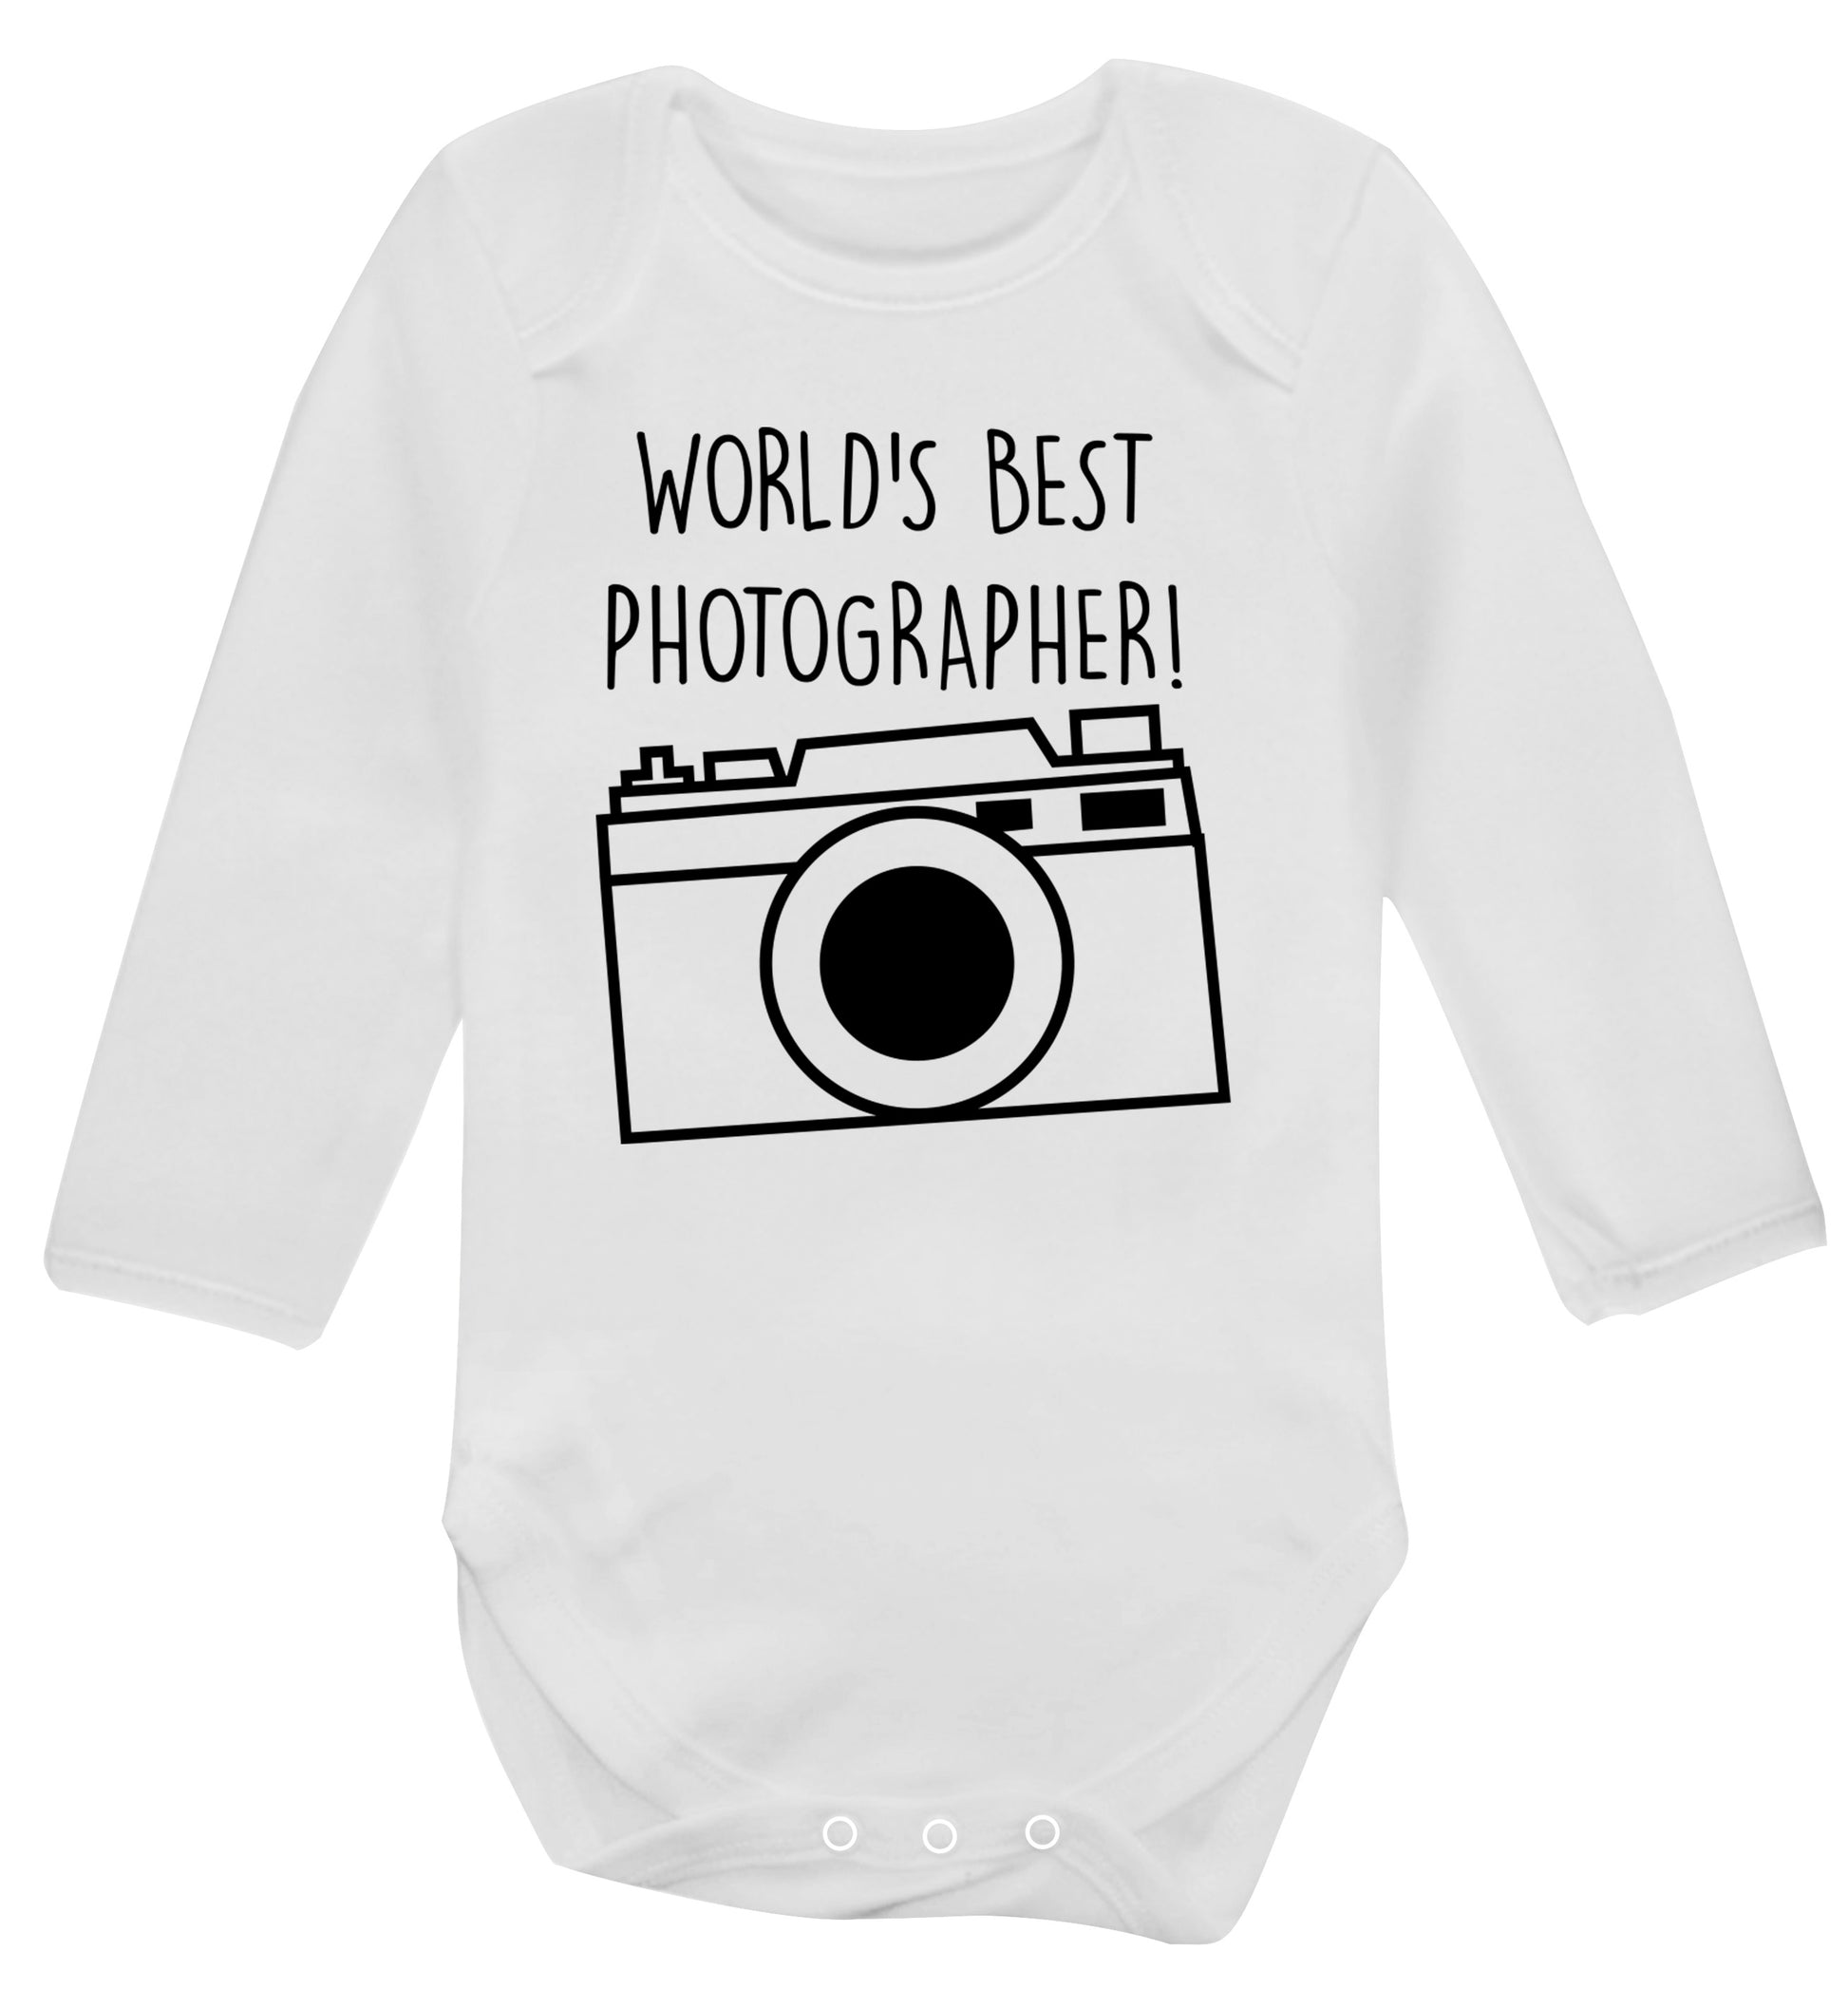 Worlds best photographer  Baby Vest long sleeved white 6-12 months